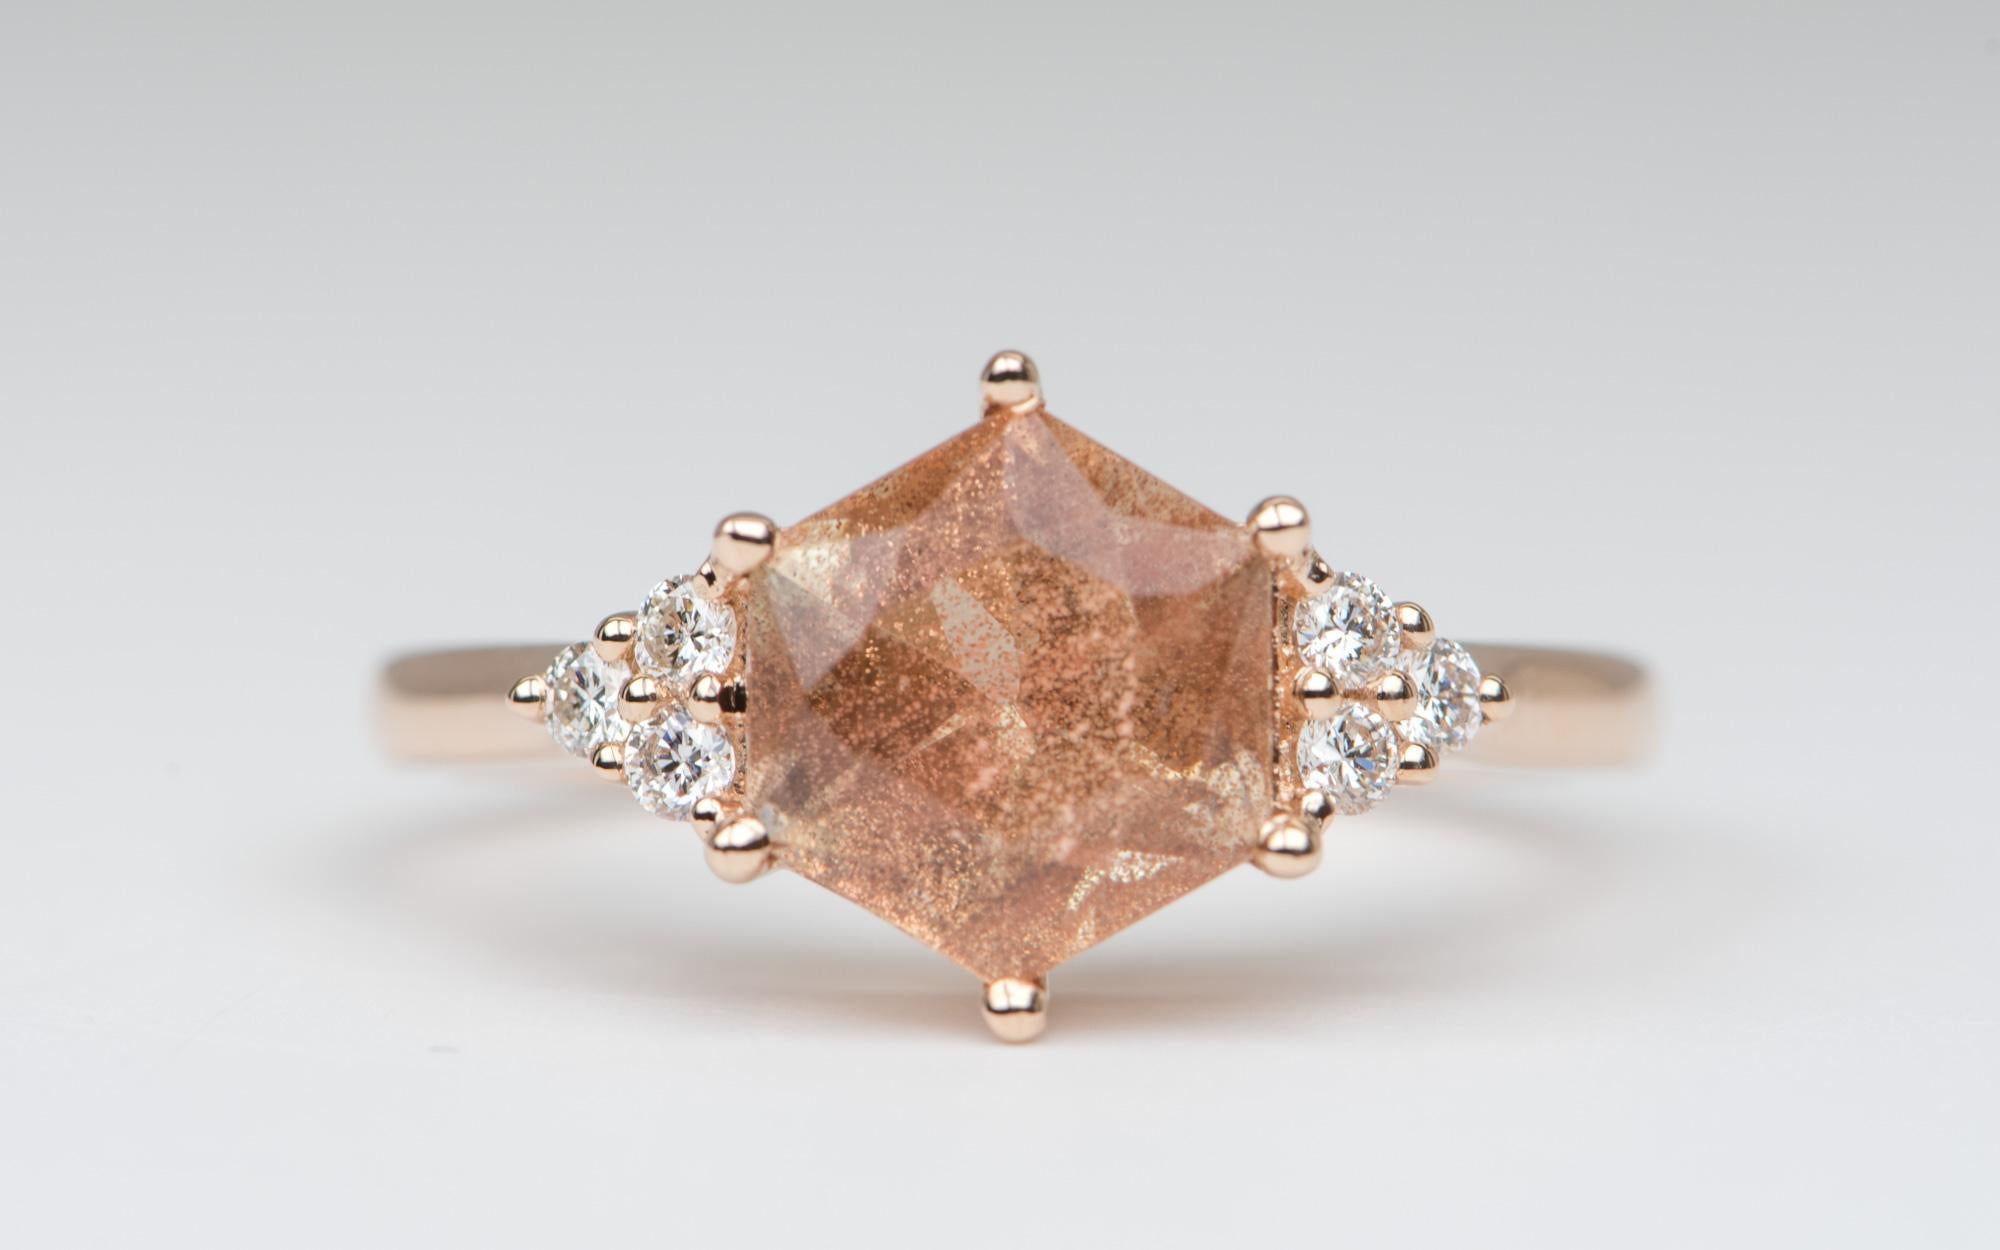 ♥  Solid 14K rose gold ring set with a hexagon-shaped Oregon sunstone in the center, flanked by three diamonds on each side
♥  The sunstone has strong 